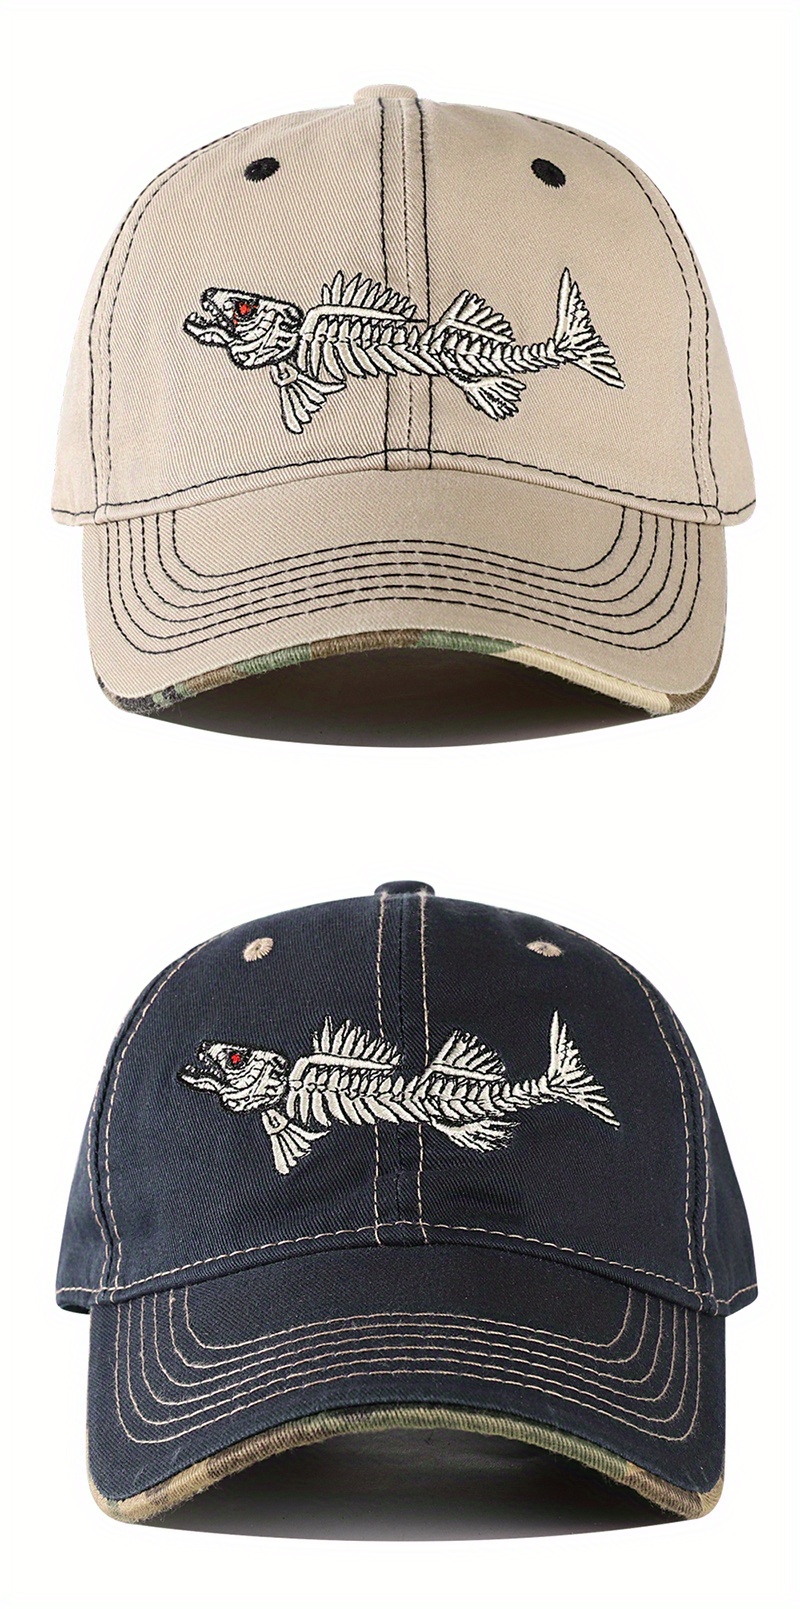 Fly fishing hats, caps and outdoor adventure apparel company